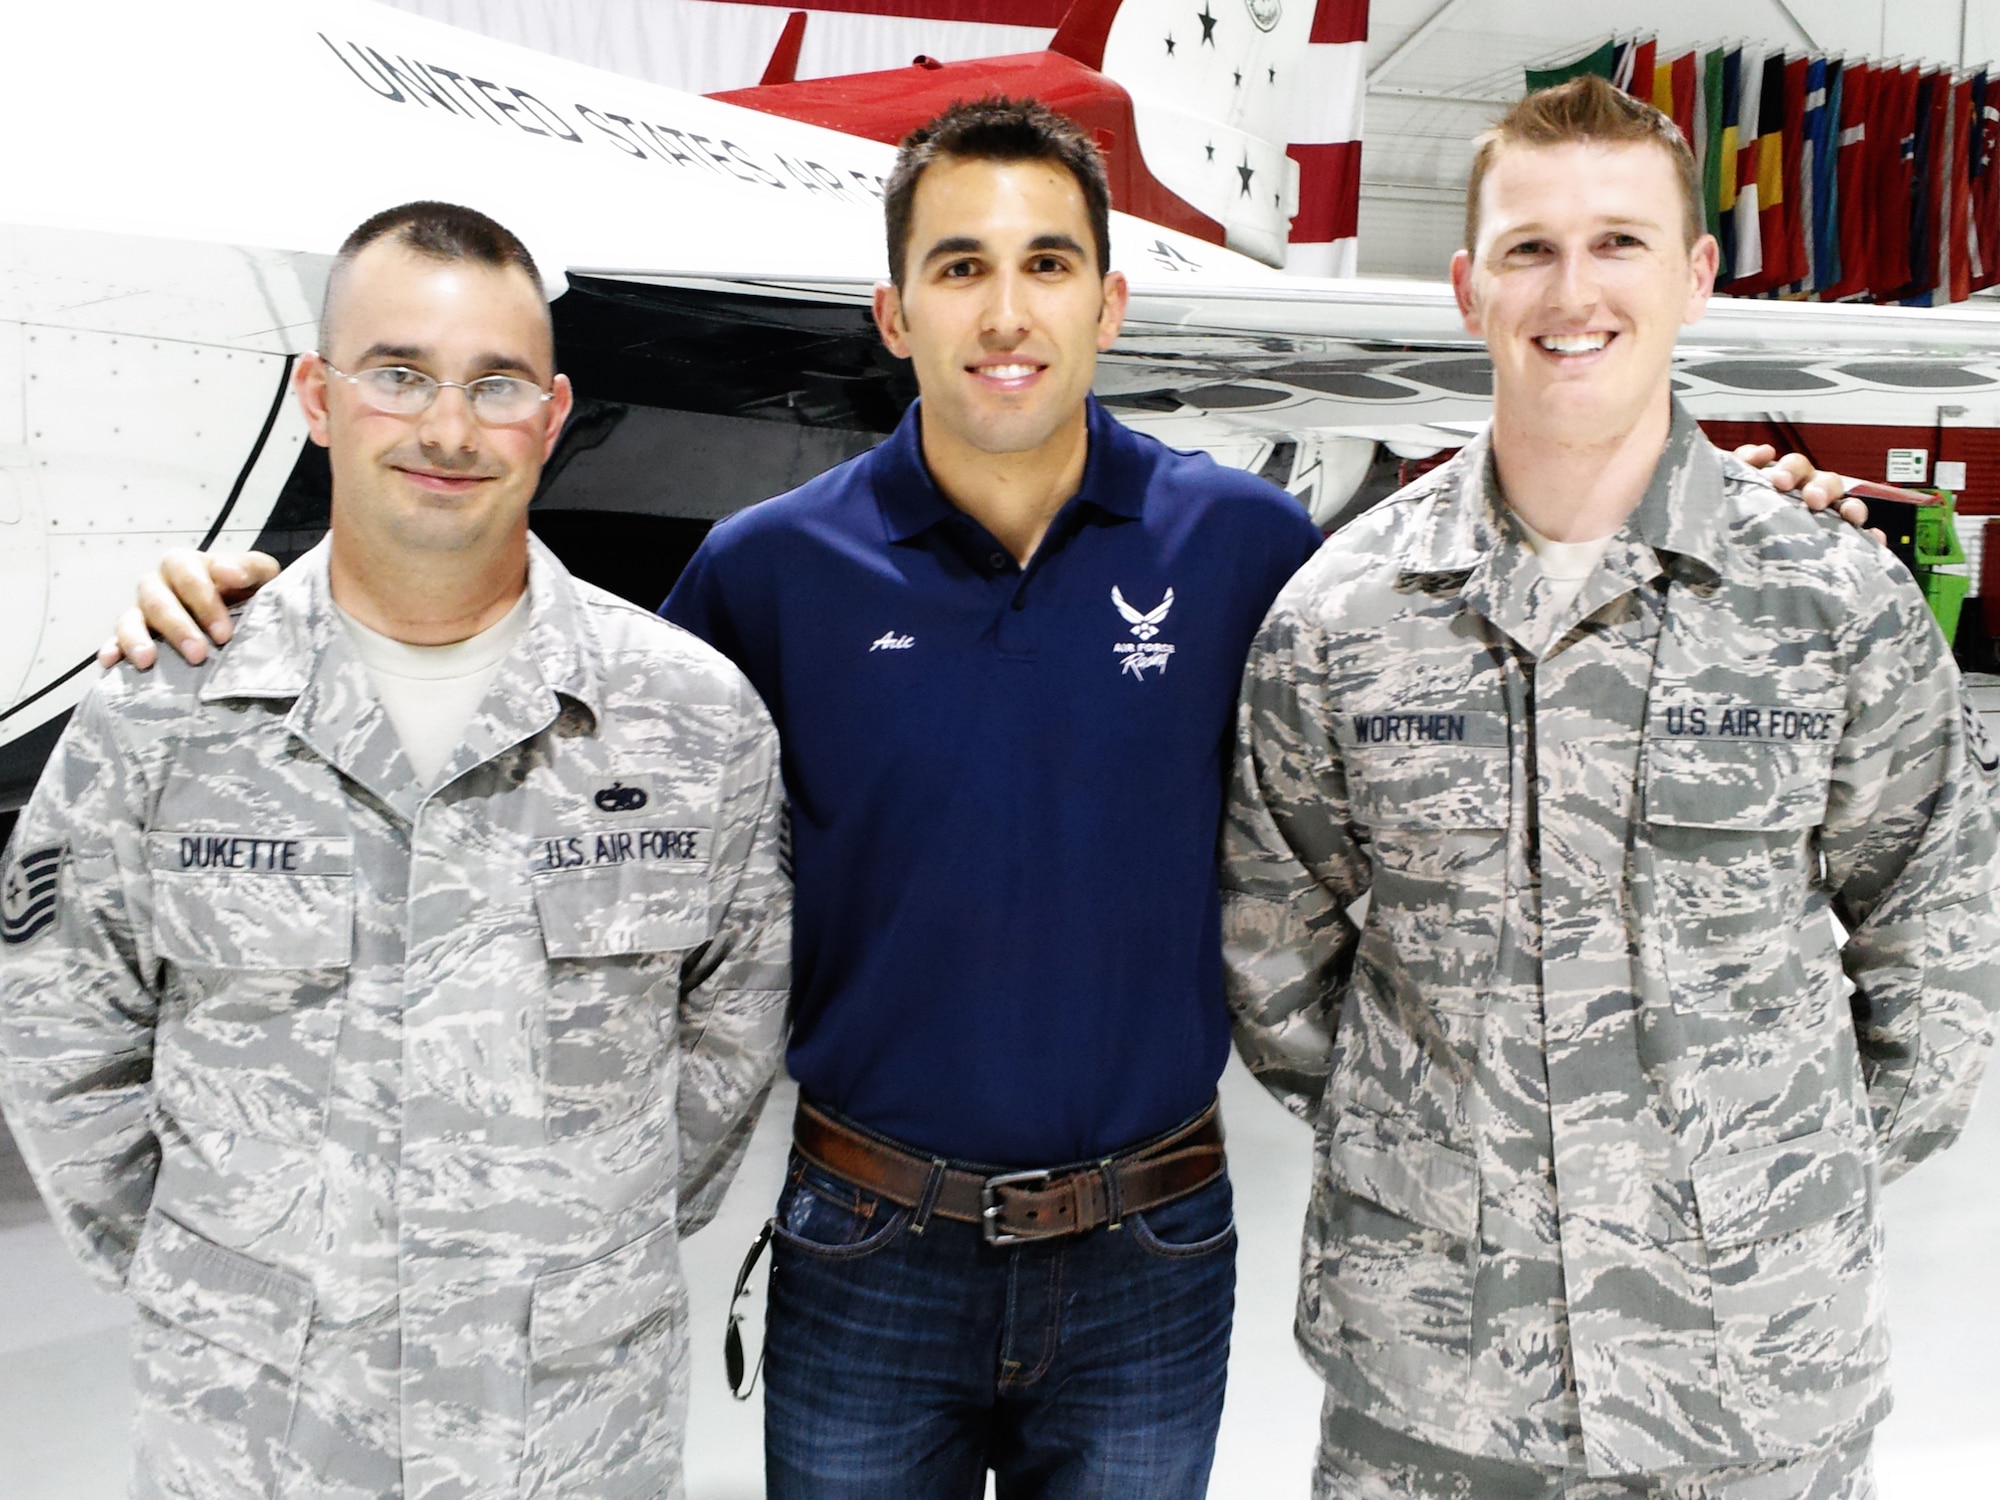 Aric Almirola, driver of the Air Force-sponsored No. 43 car, greets two new members of the U.S. Air Force Thunderbirds Air Demonstration Squadron in the Thunderbirds hangar March 8, 2012. Almirola was in town to compete in the Kobalt Tools 400 NASCAR race at Las Vegas Motor Speedway March 11.